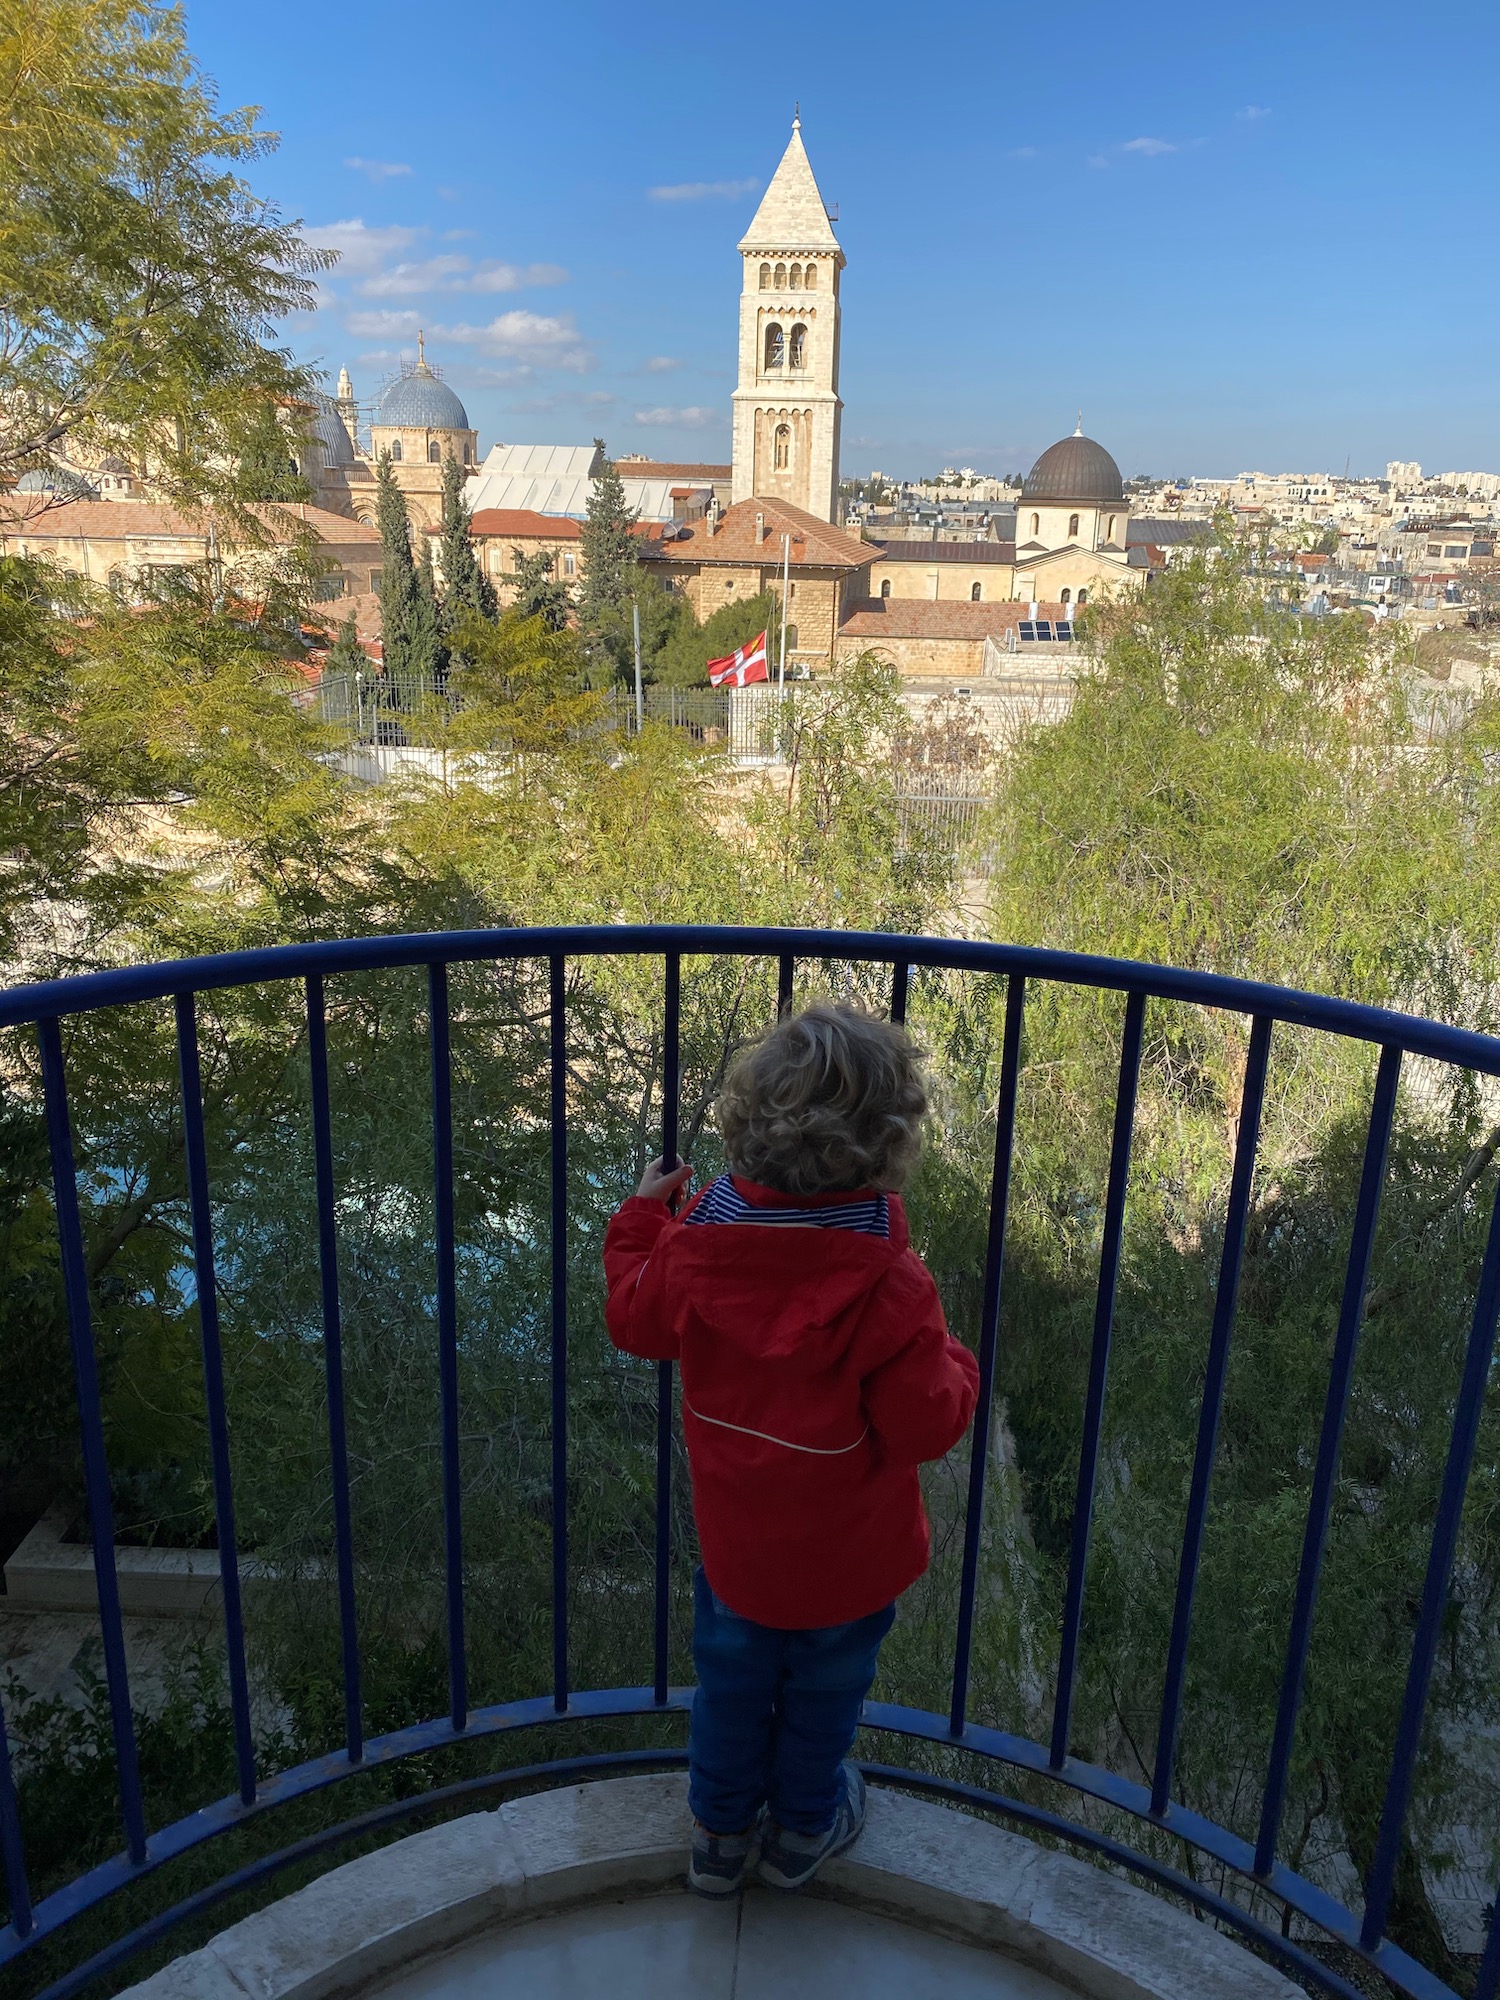 a child standing on a balcony overlooking a city